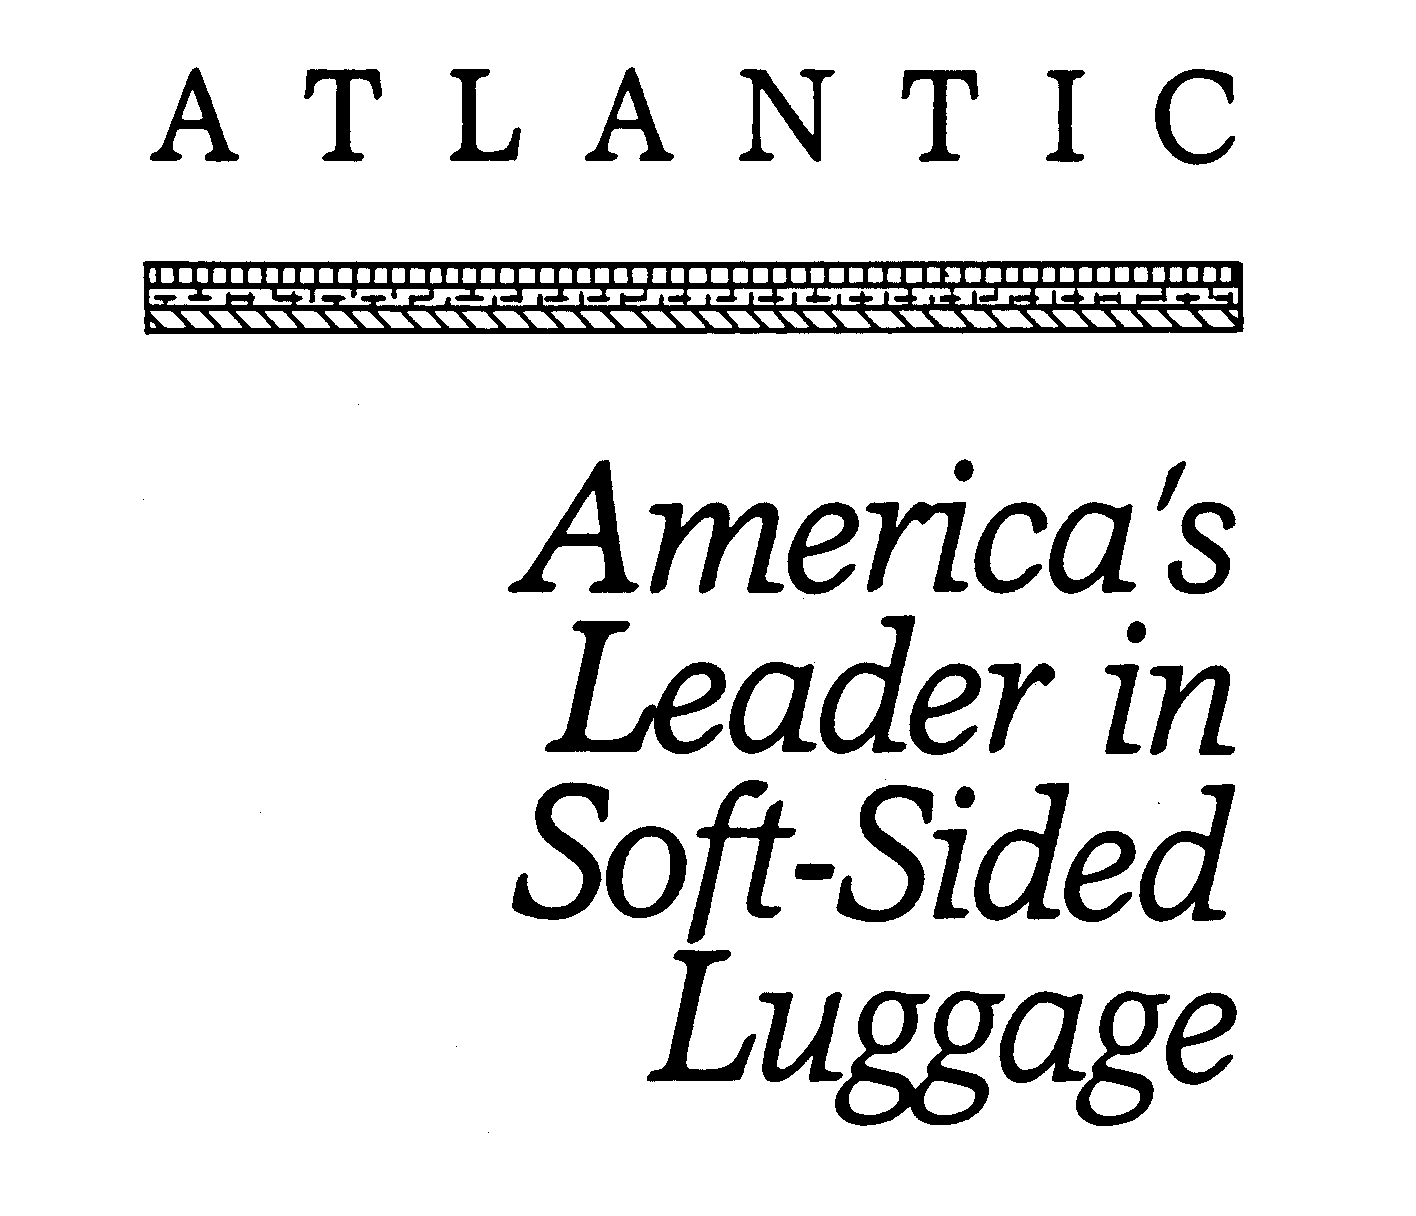  ATLANTIC AMERICA'S LEADER IN SOFT-SIDED LUGGAGE